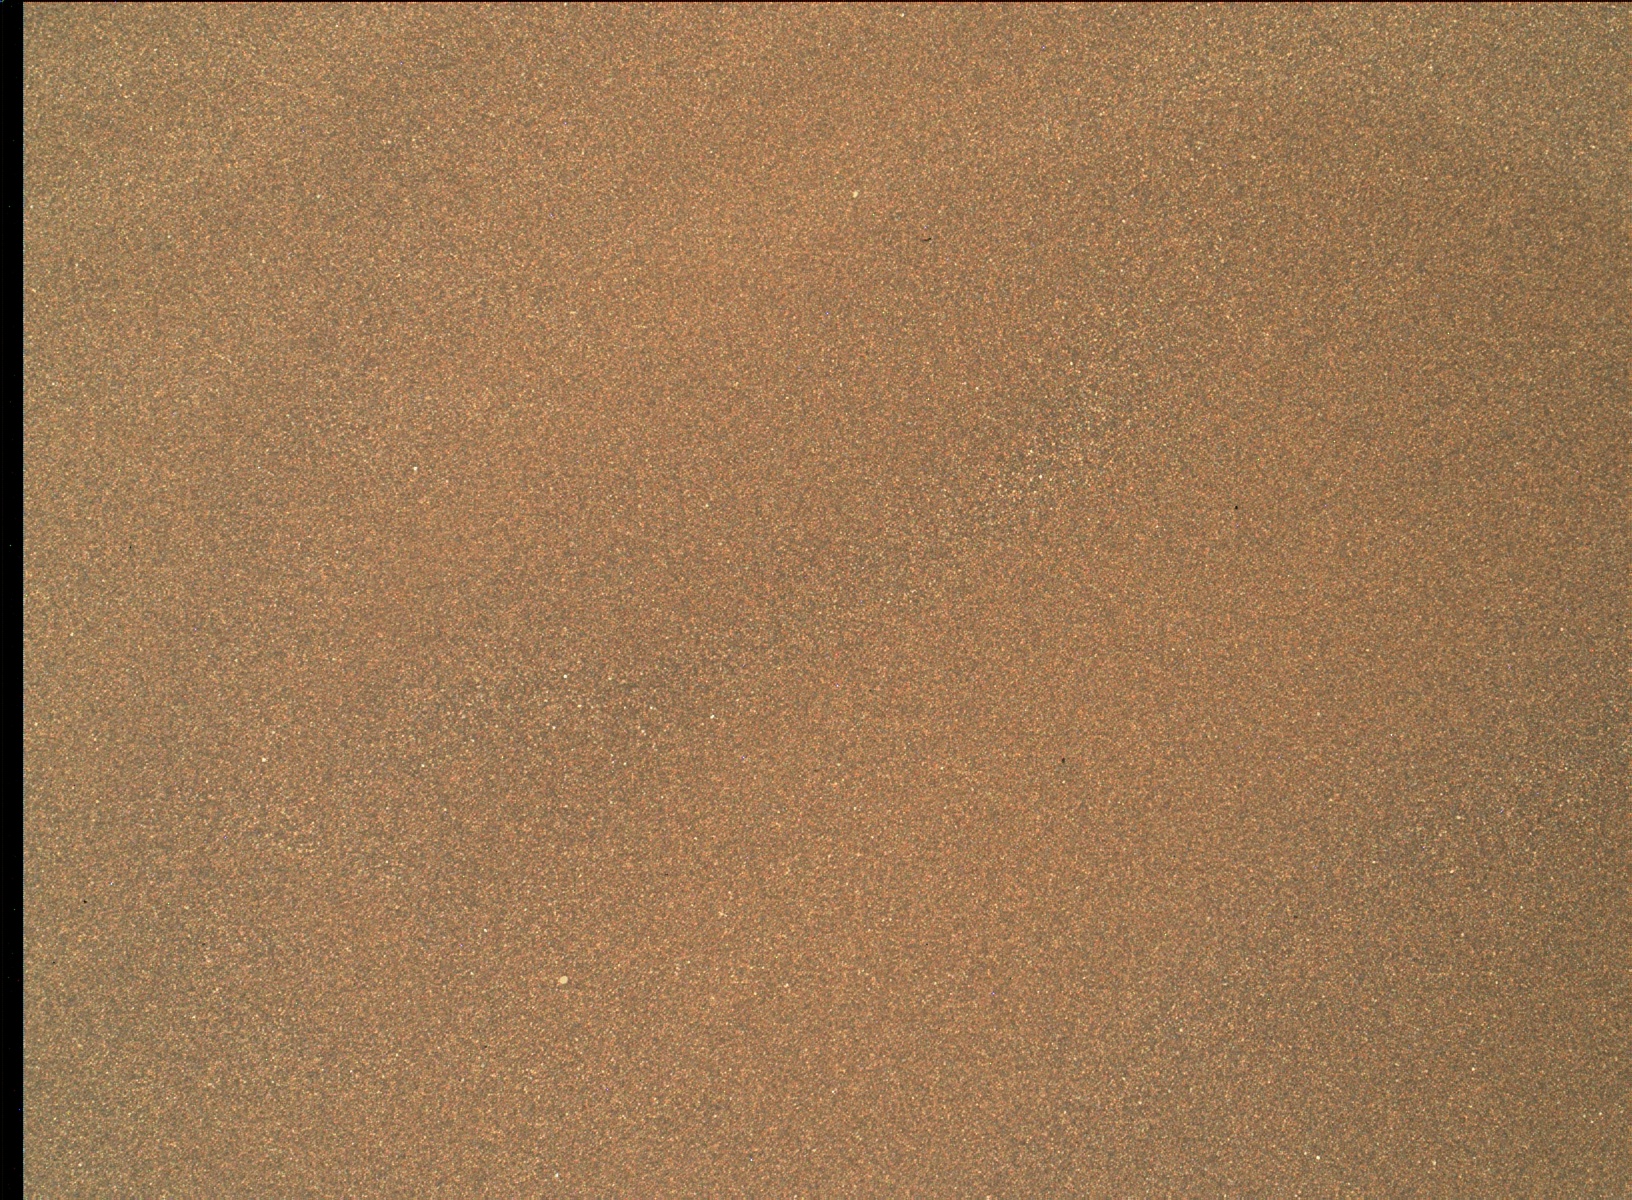 Nasa's Mars rover Curiosity acquired this image using its Mars Hand Lens Imager (MAHLI) on Sol 1657